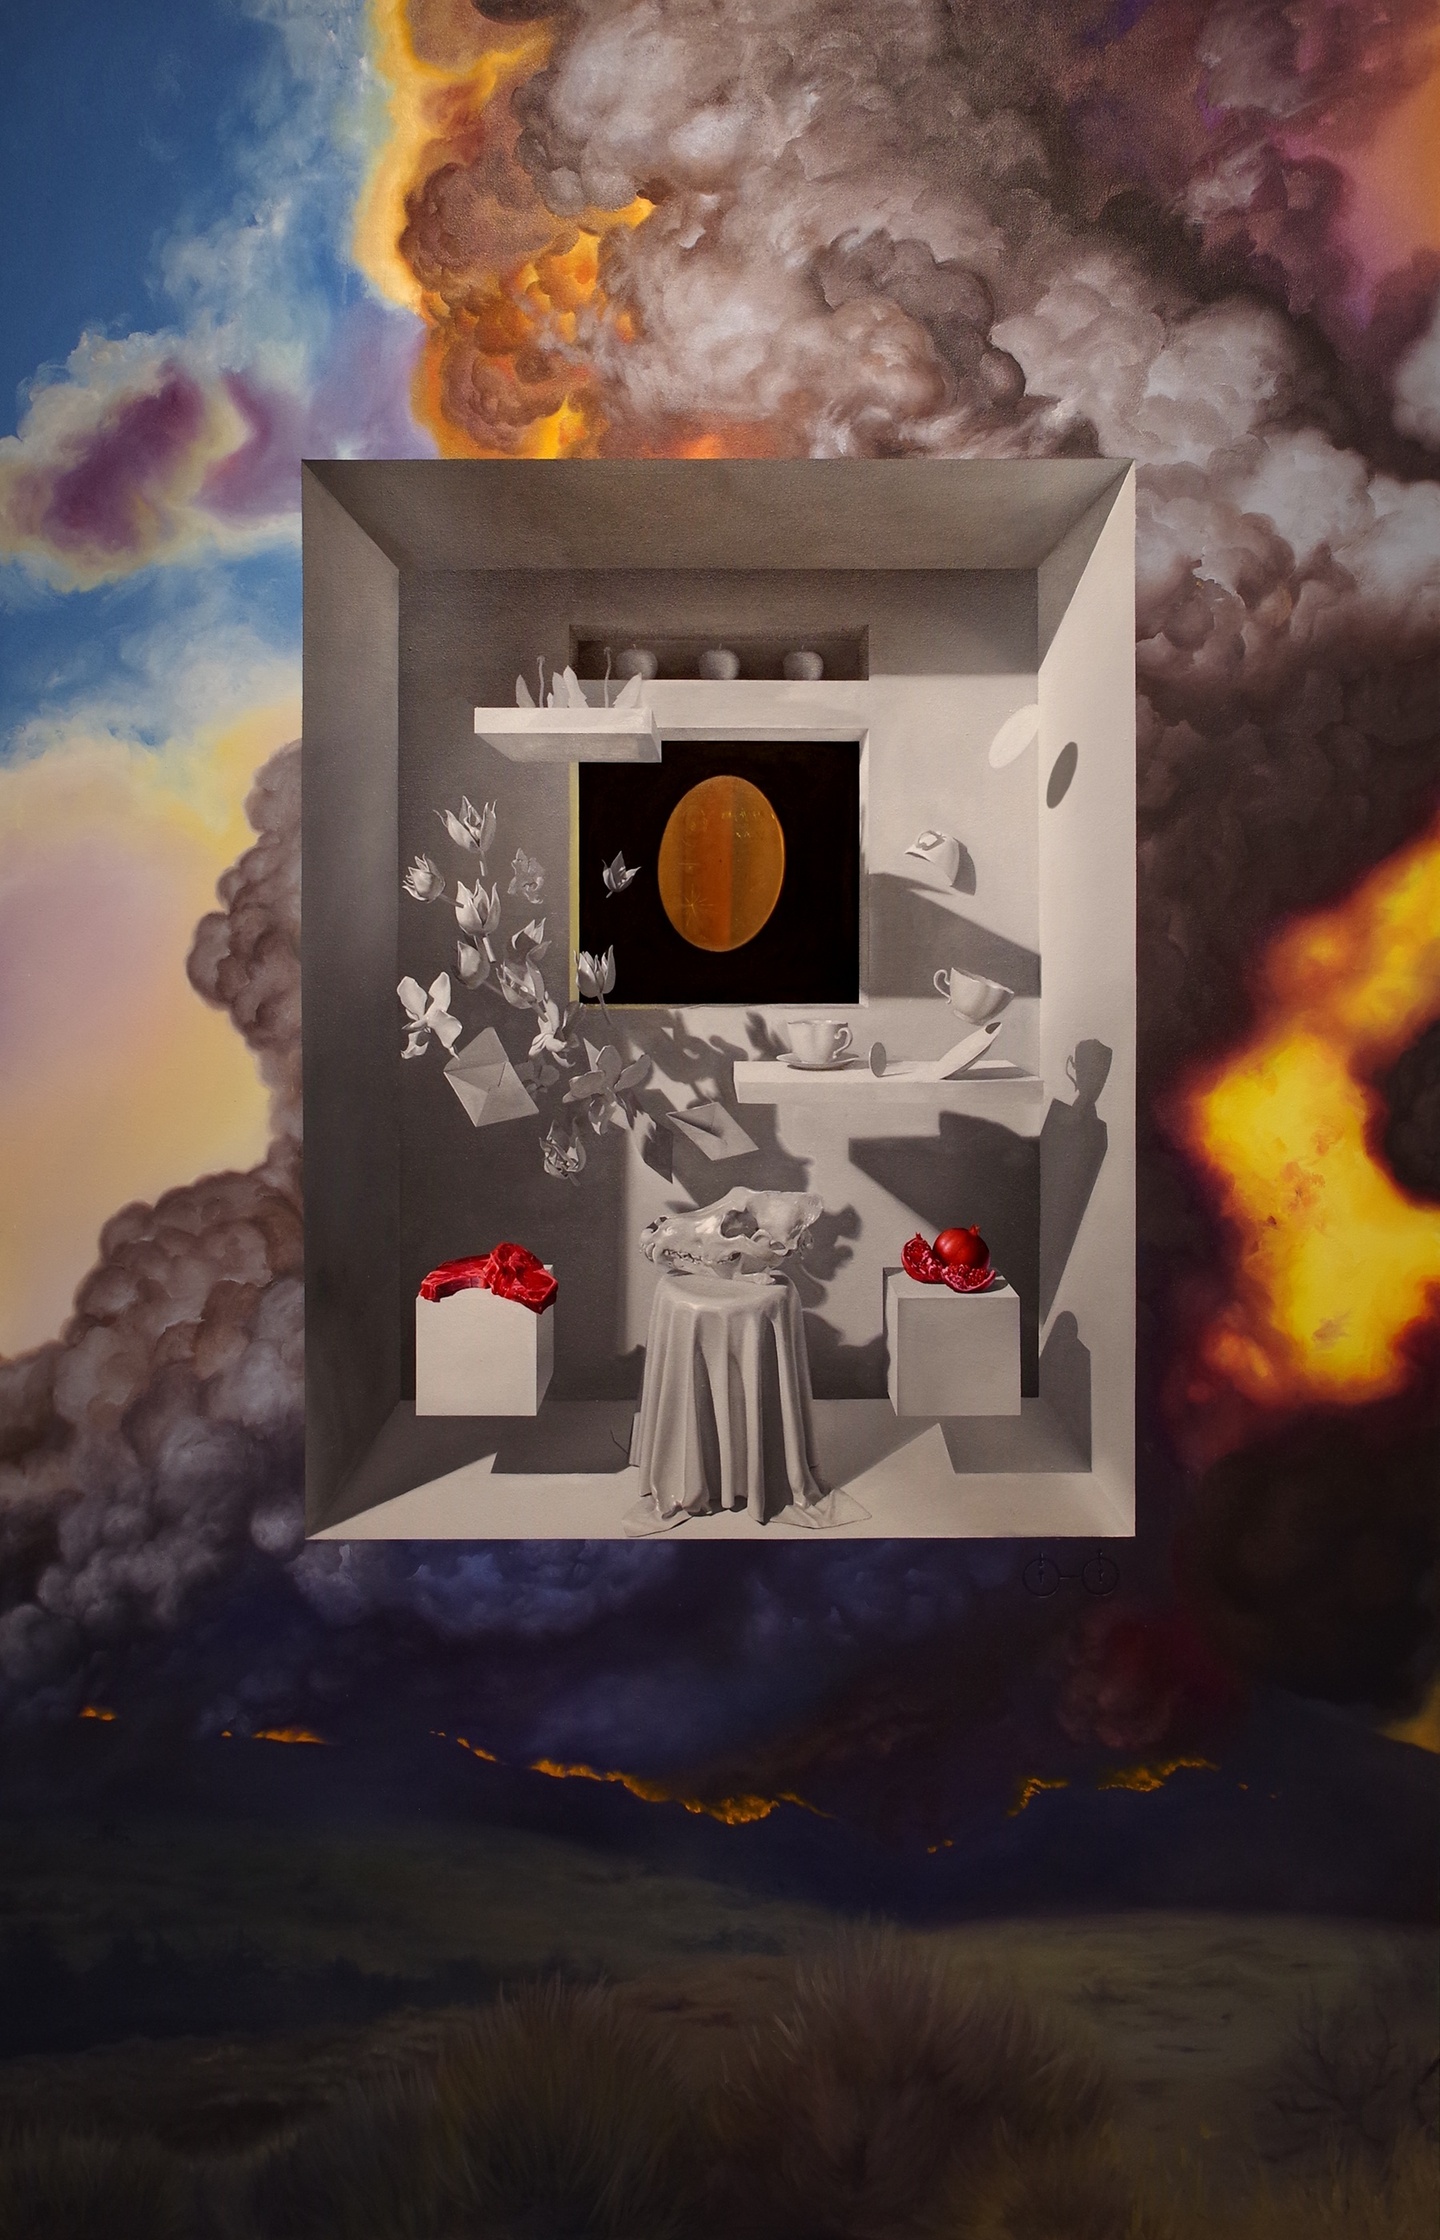 A large oil painting depicting a cloudy fiery landscape. In the center a greyscale 3D room with floating objects and a red piece of meat and pomegranate